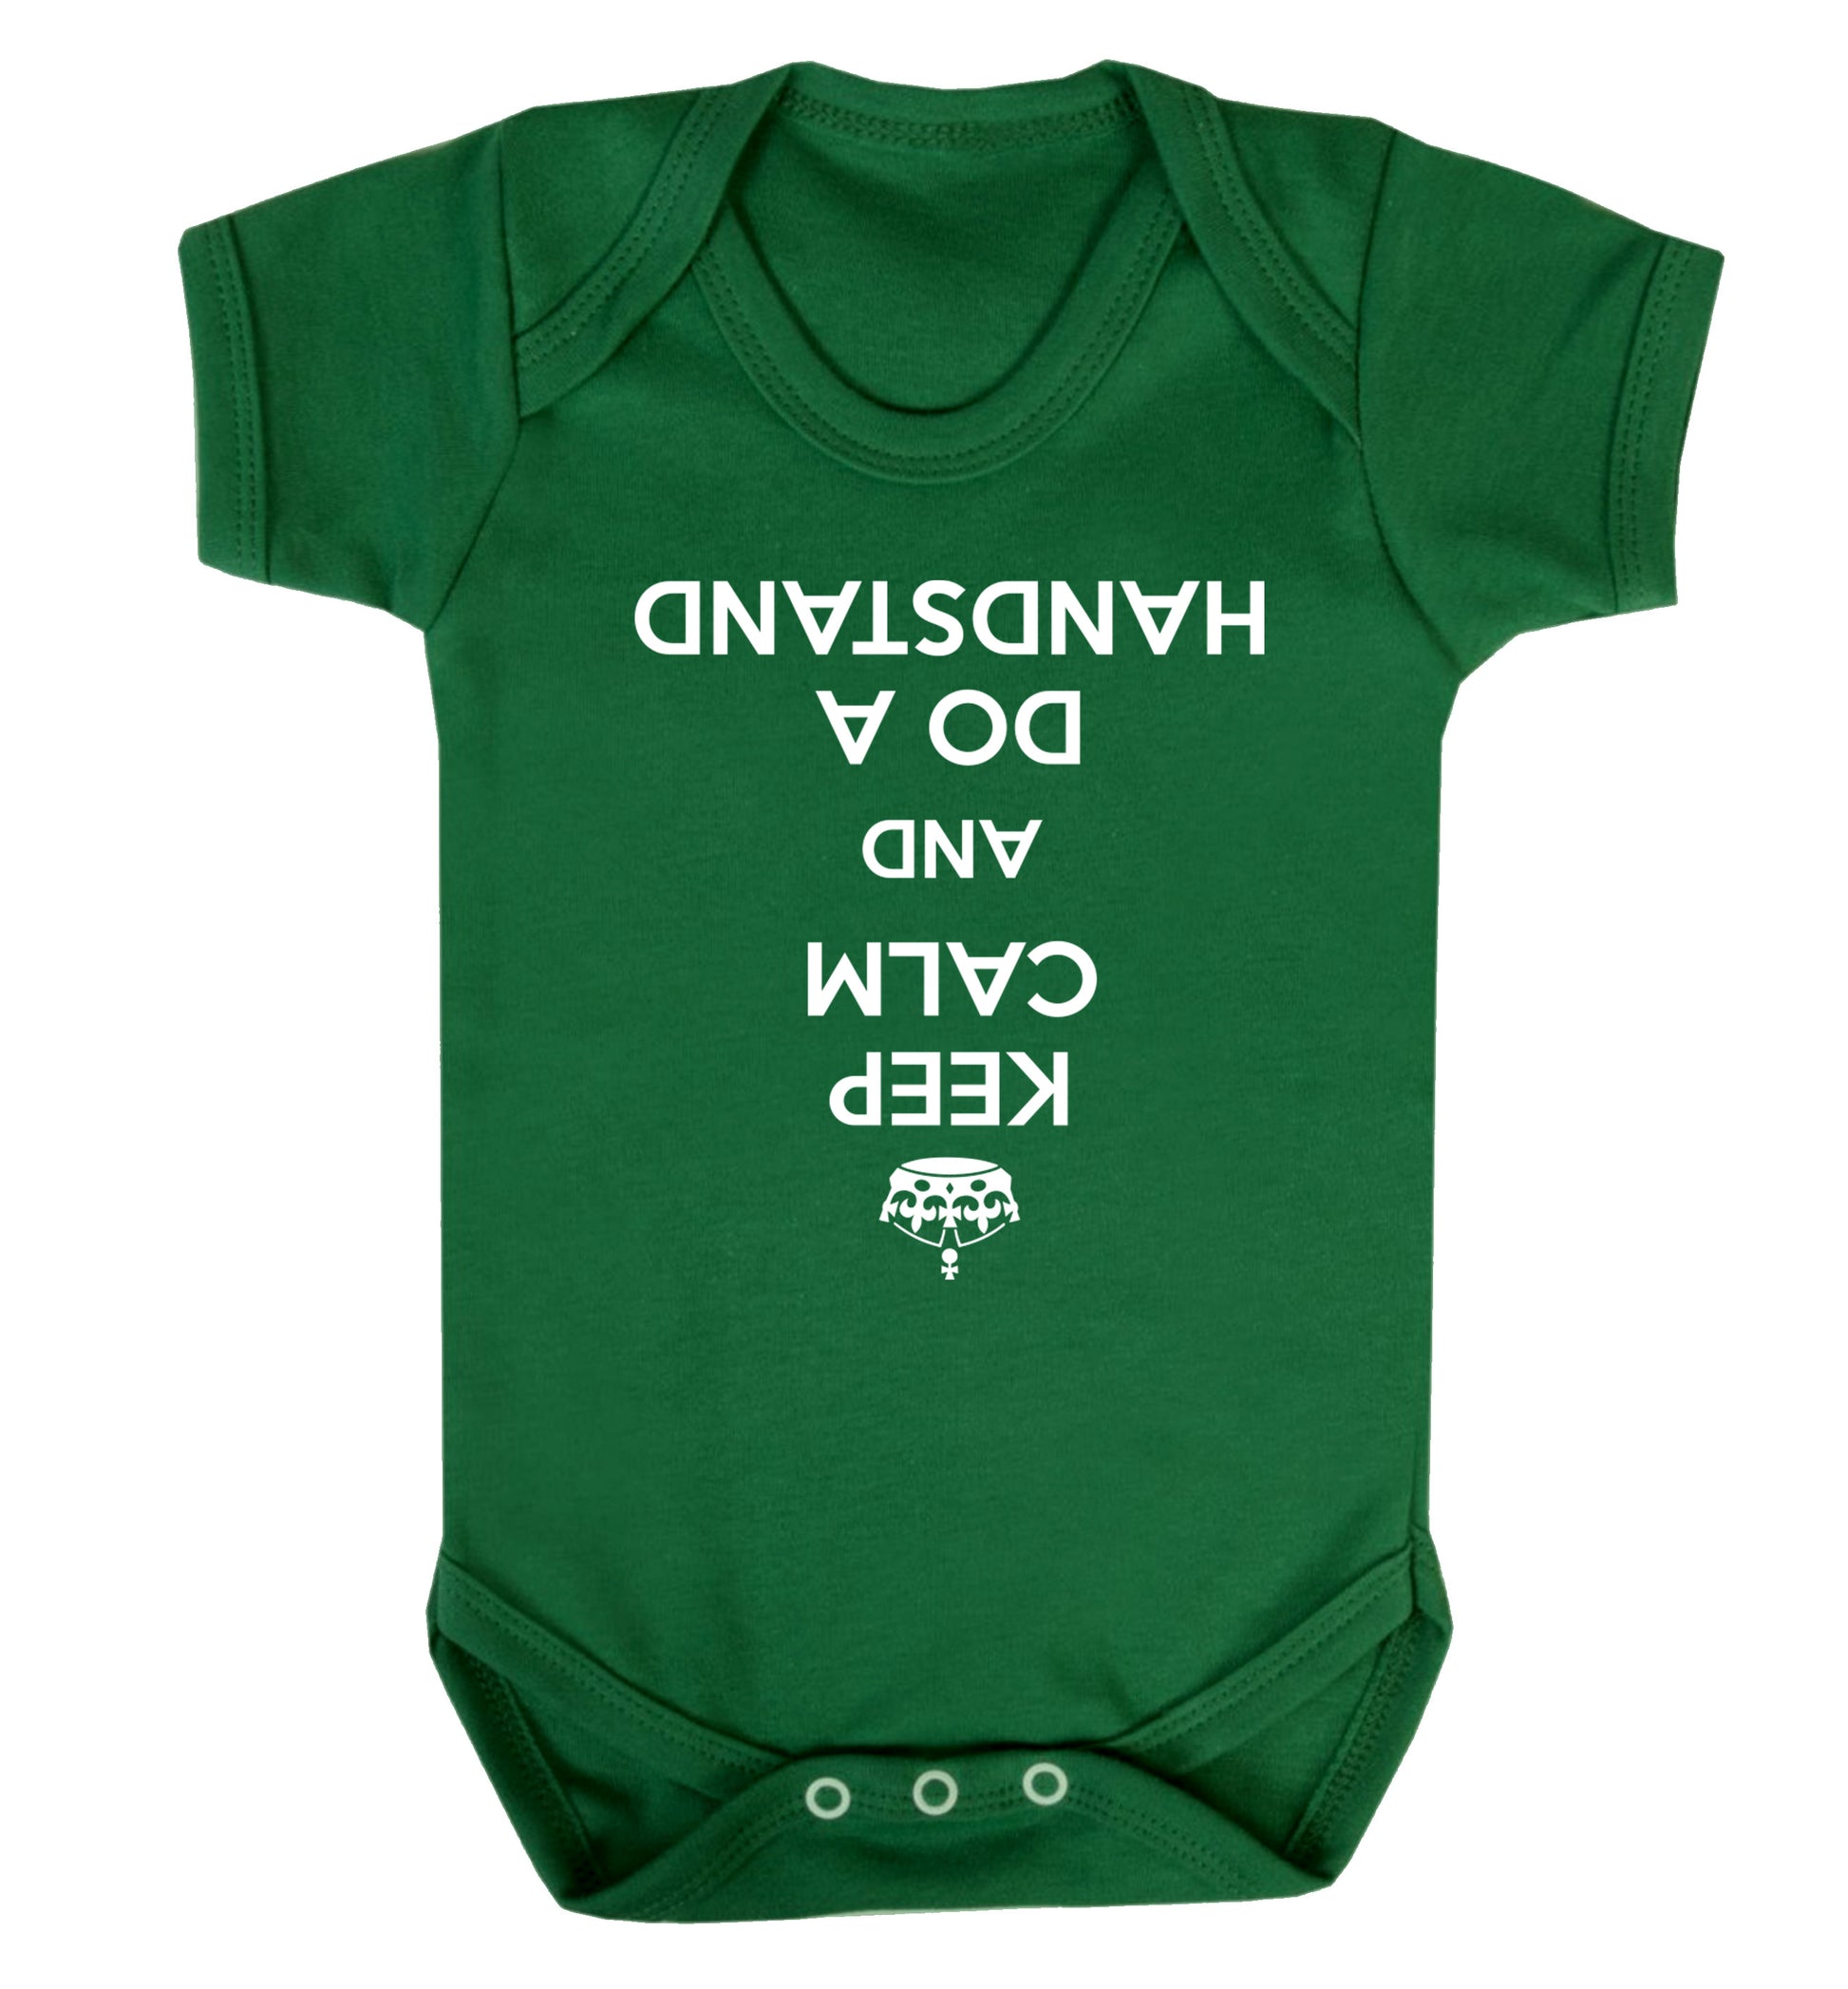 Keep calm and do a handstand Baby Vest green 18-24 months